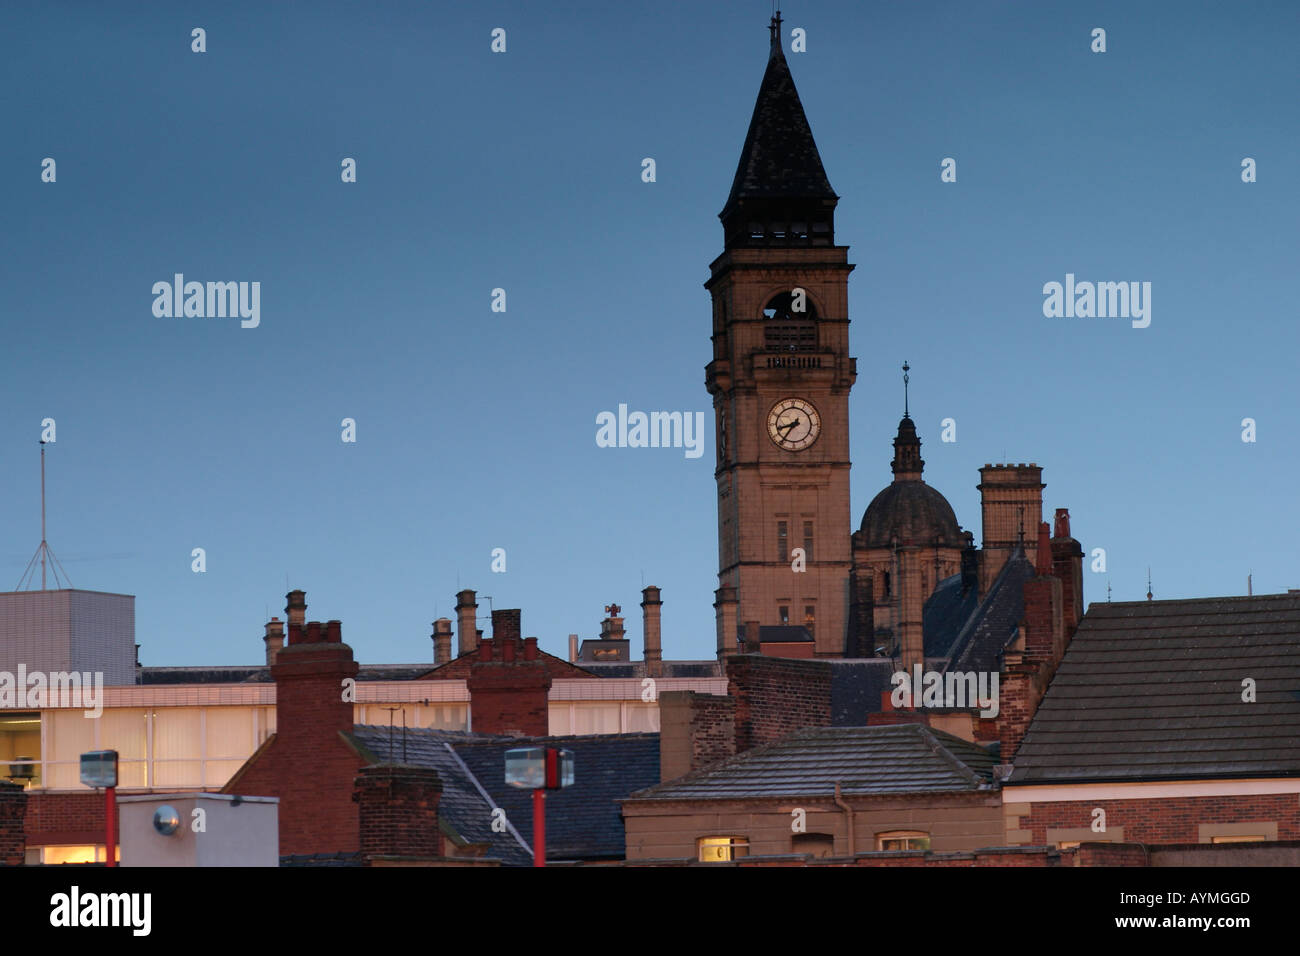 Morning sun catches the clock tower of City Hall Wakefield with chimneys and roofs of adjacent offices in view Stock Photo